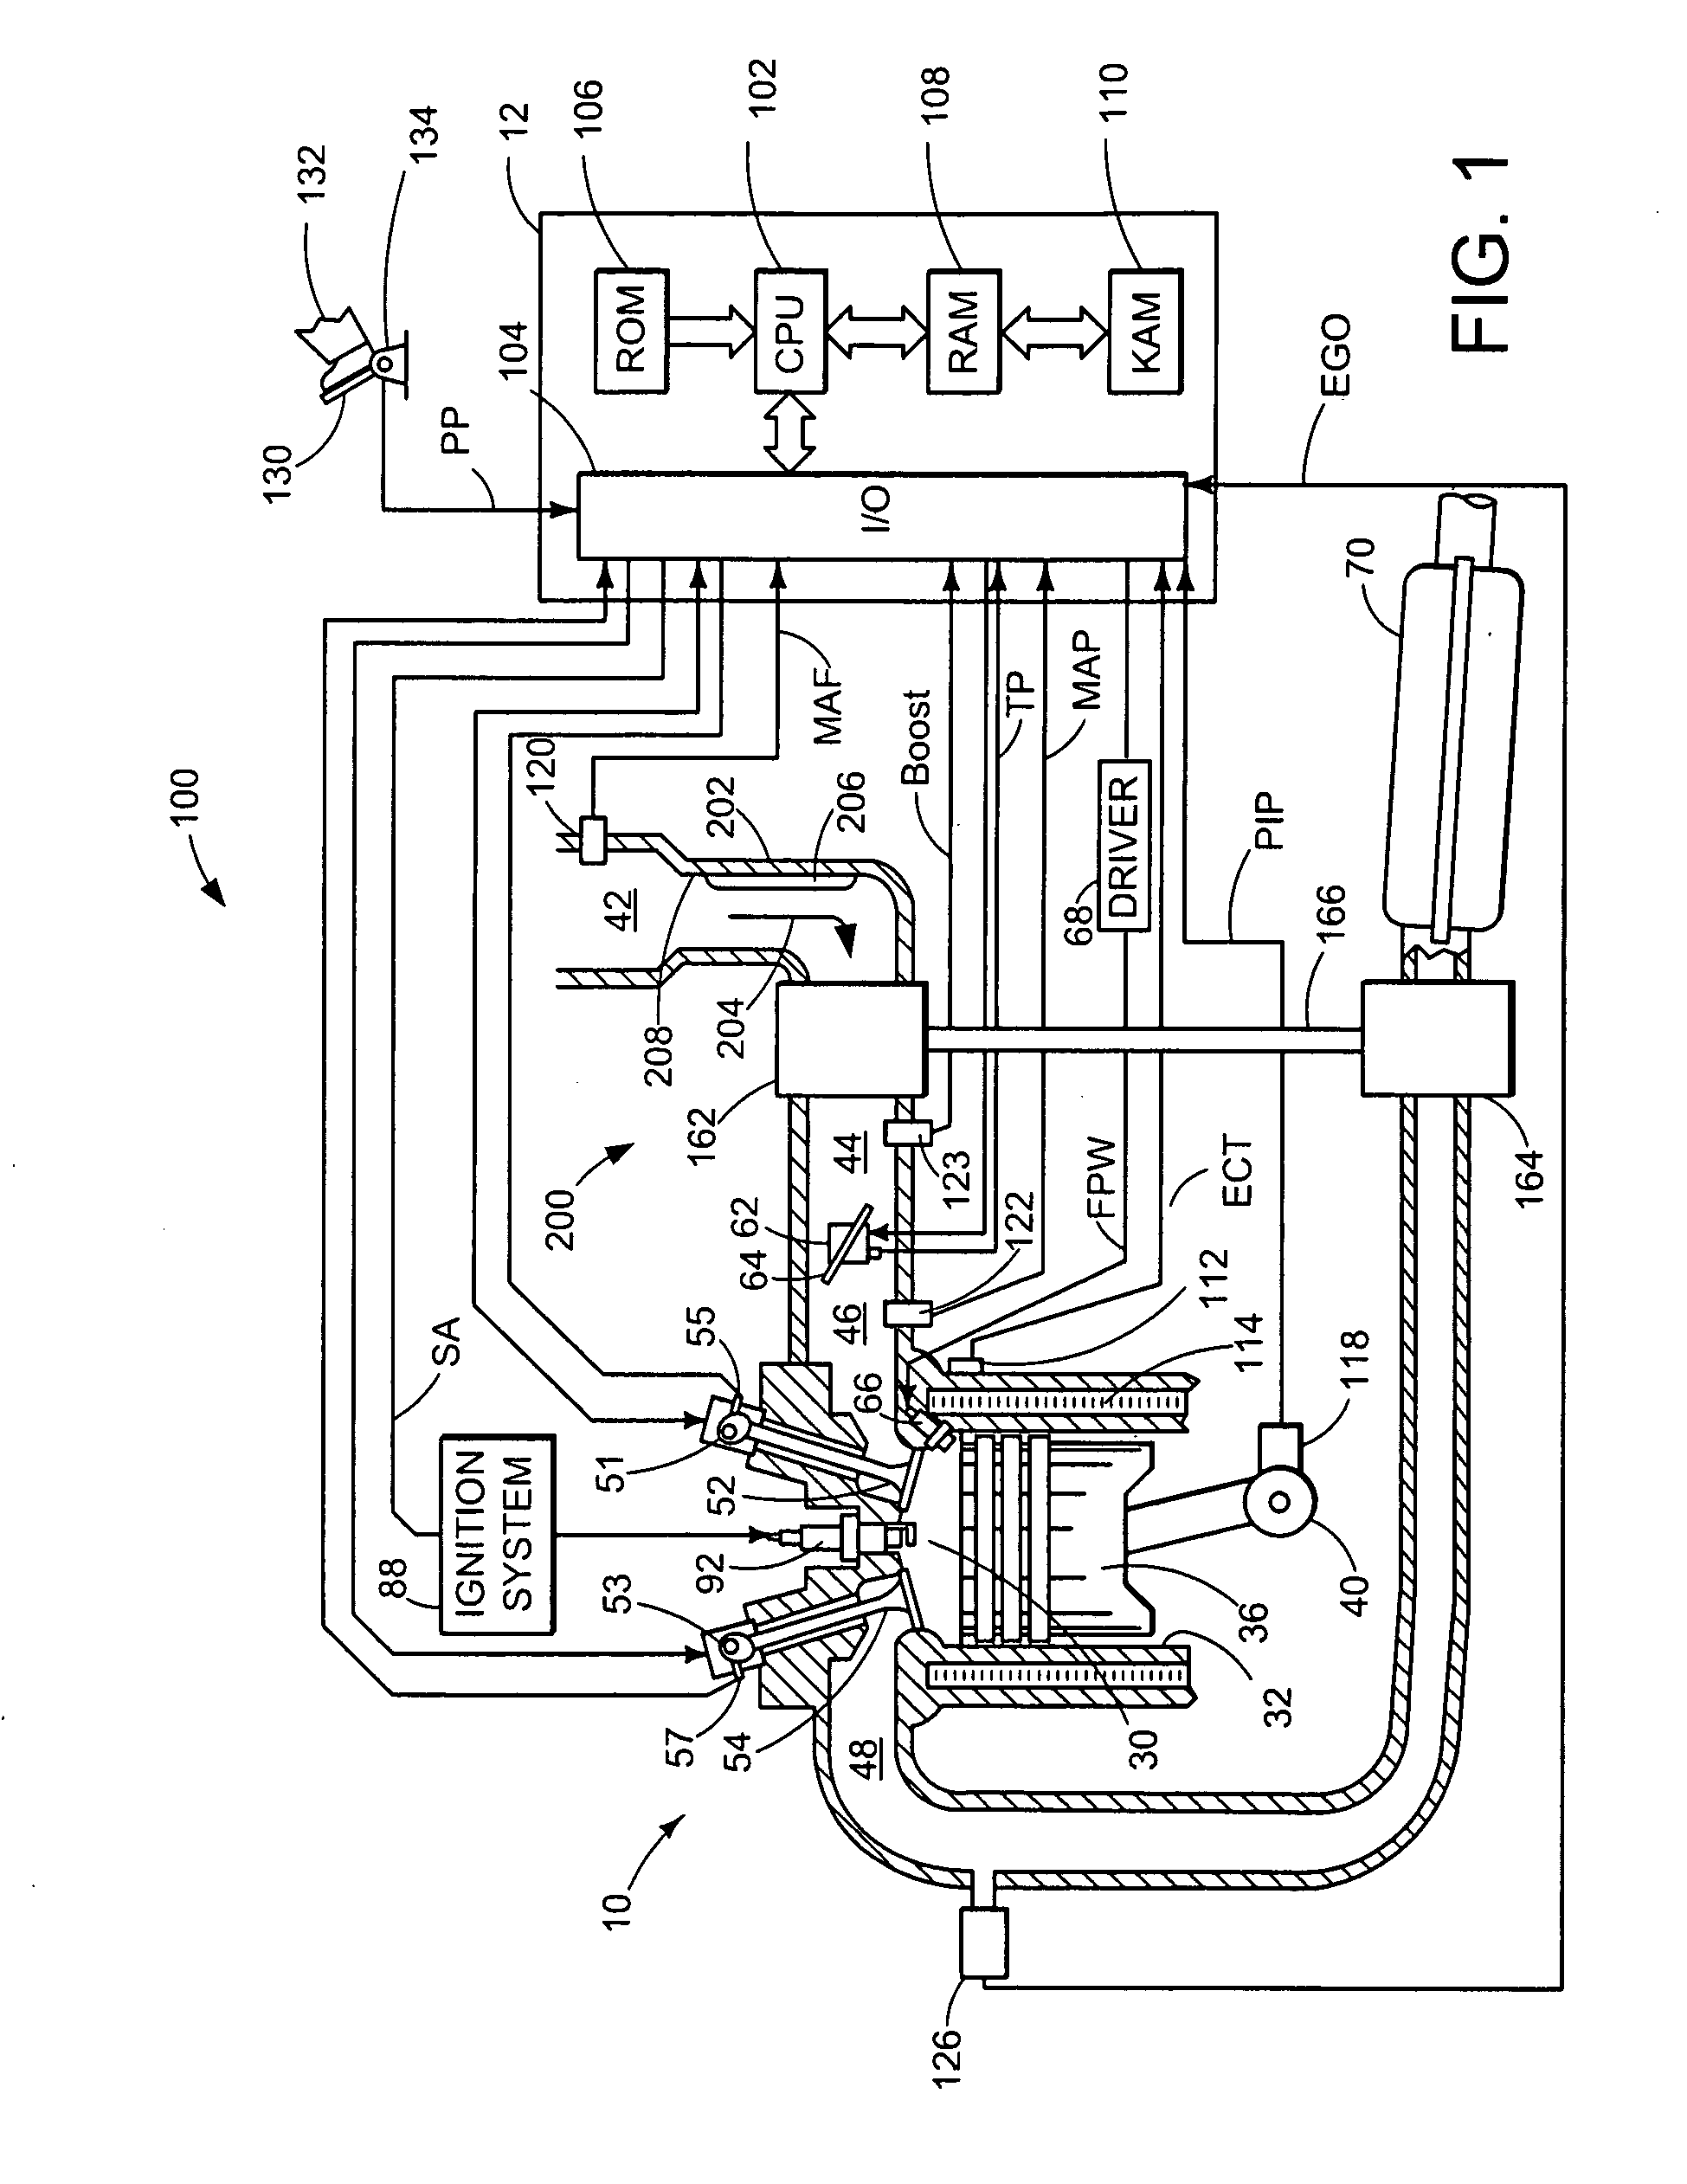 Inlet Swirl Control for Turbochargers